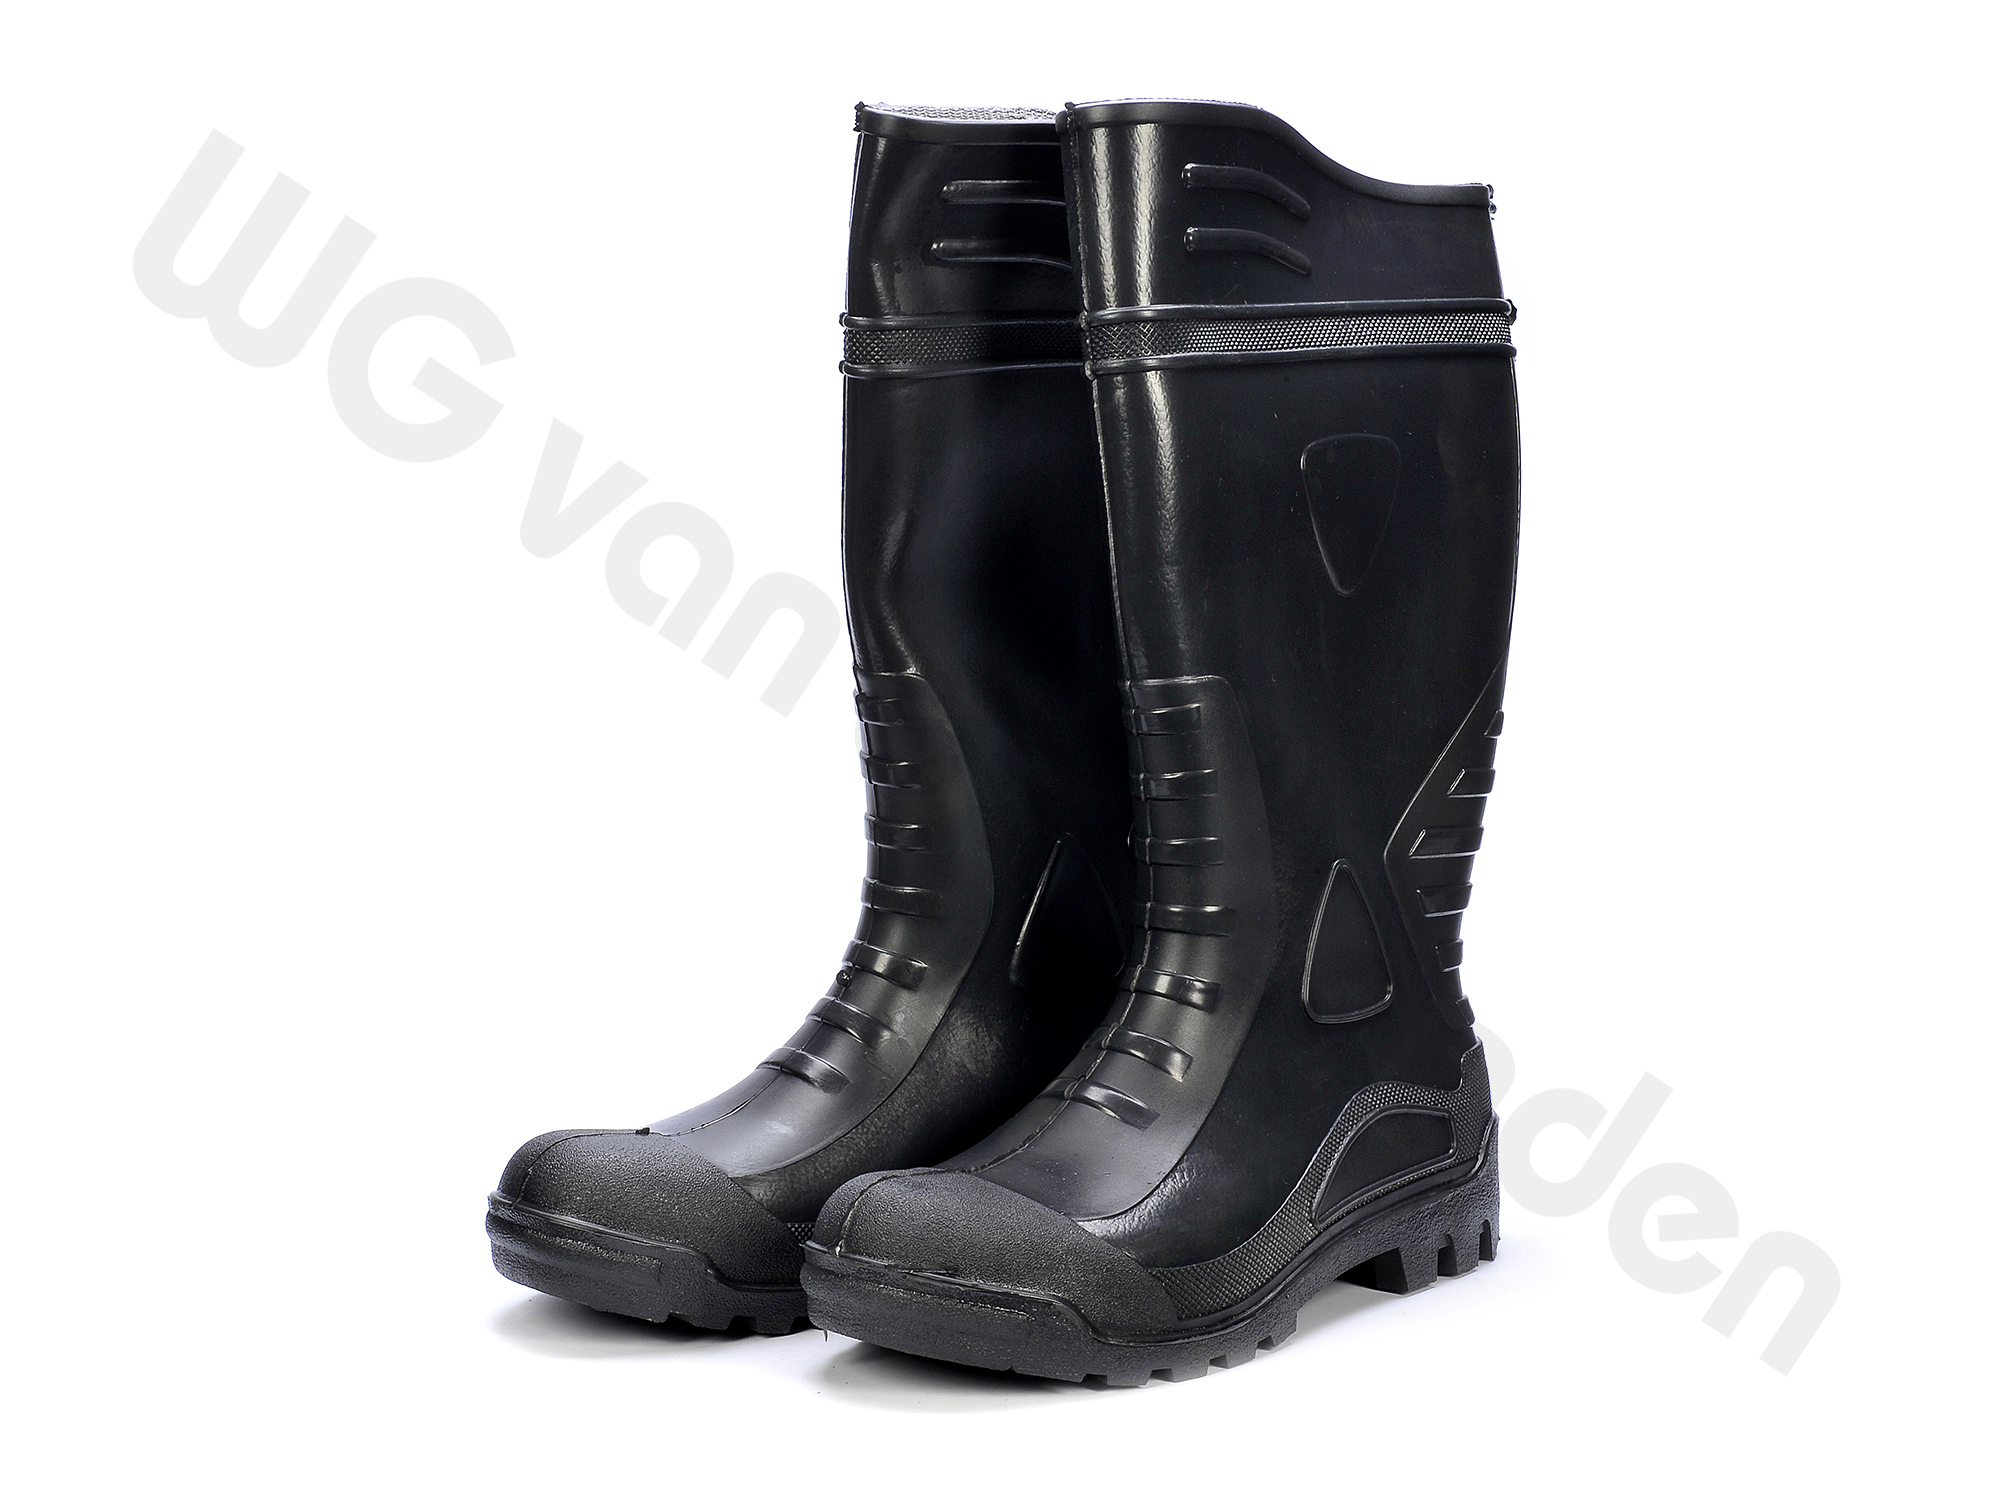 880205 BOOTS SAFETY S4 PVC WITH STEEL TOE SIZE 42/27CM CE